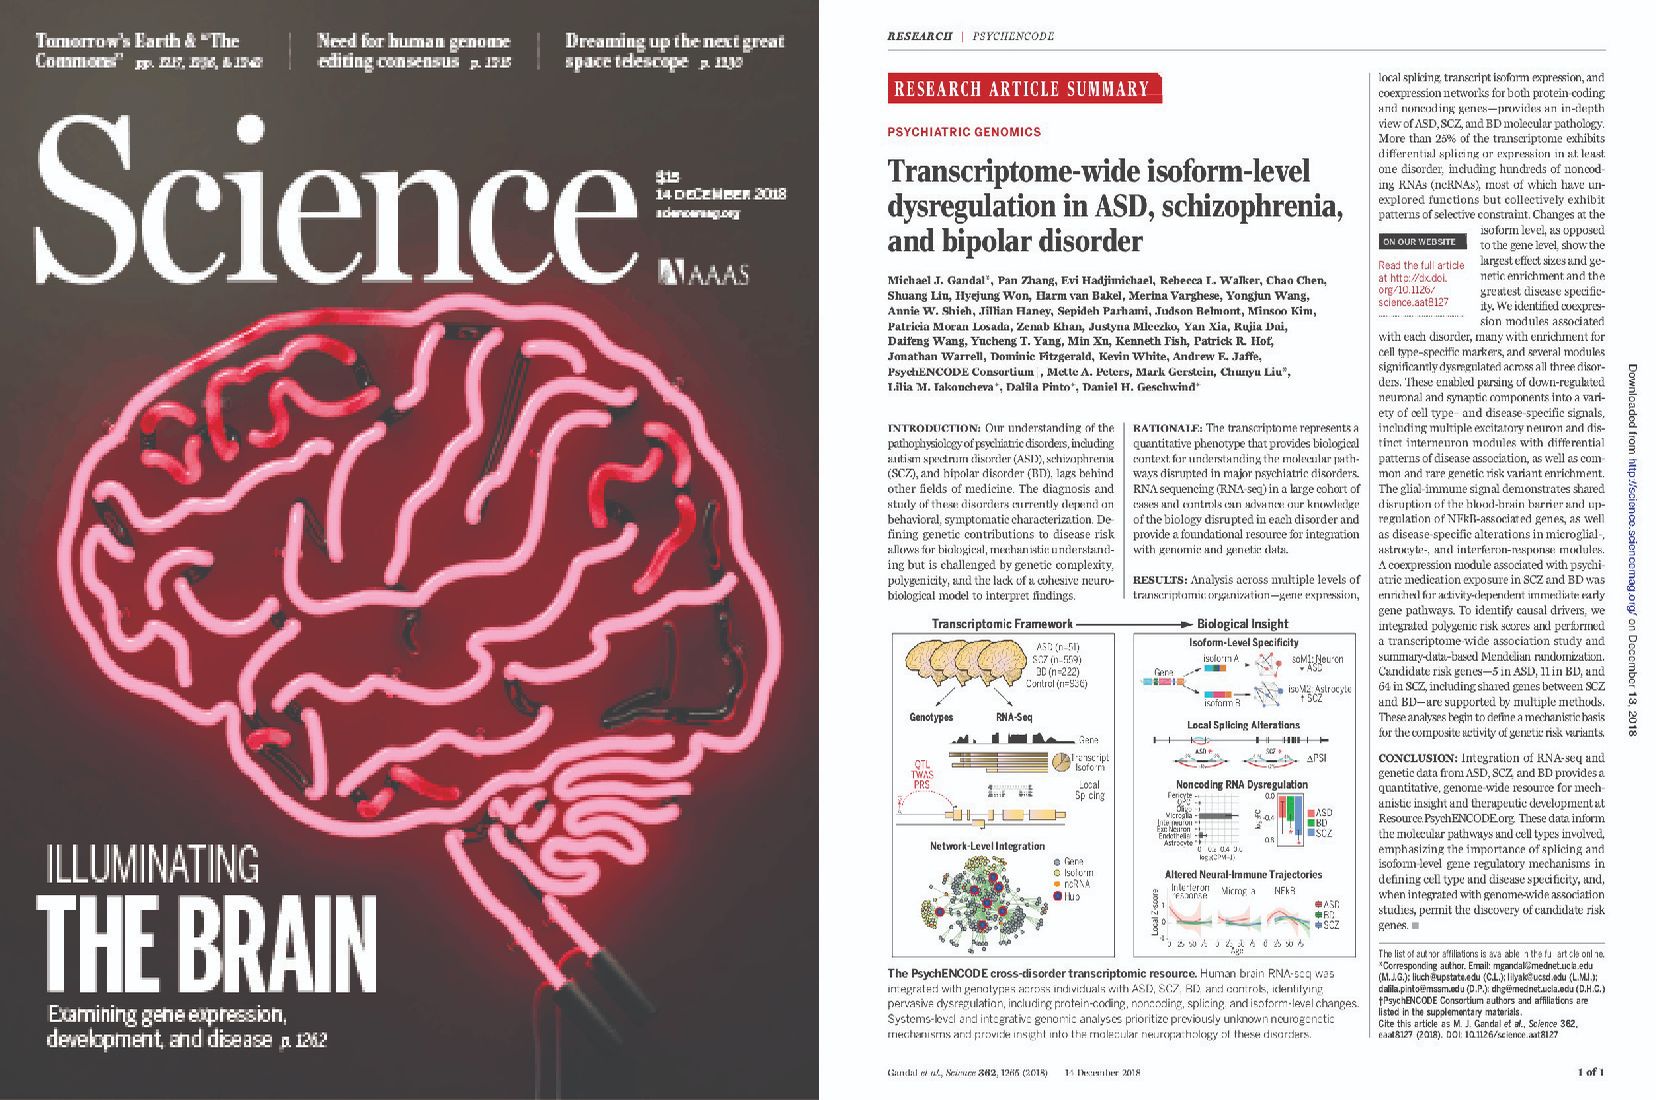 Science magazine article